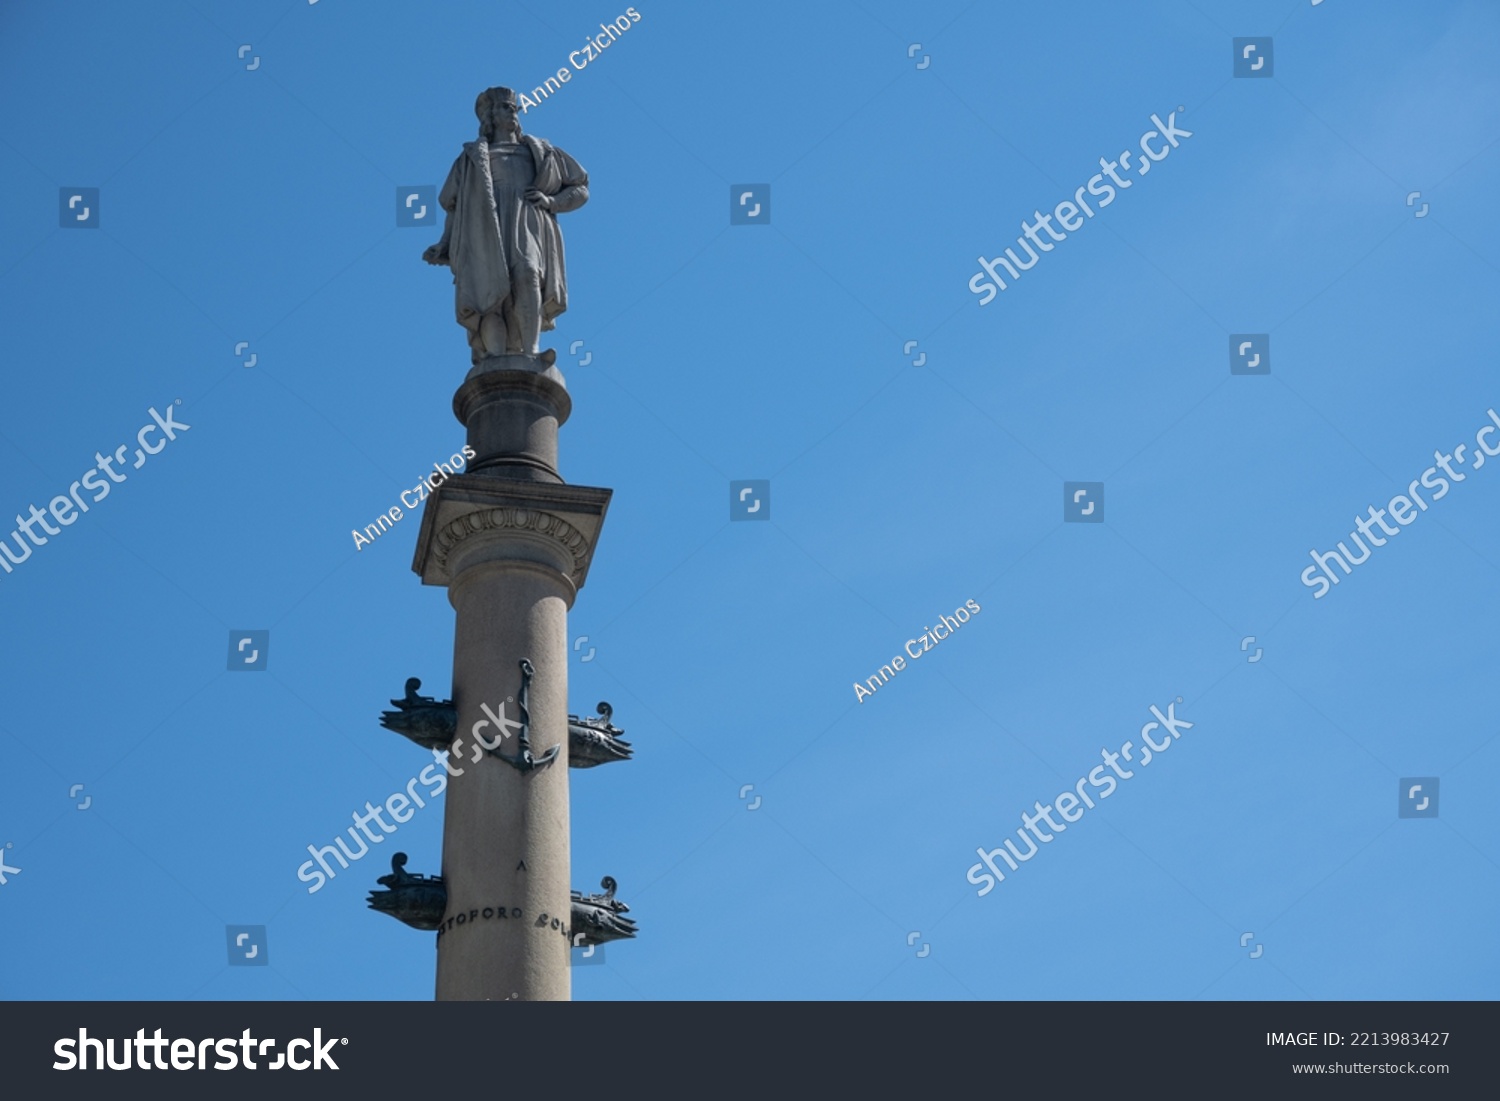 The Columbus Monument by Italian sculptor Gaetano Russo (1892) in Columbus Circle in New York City, seen against a blue sky #2213983427